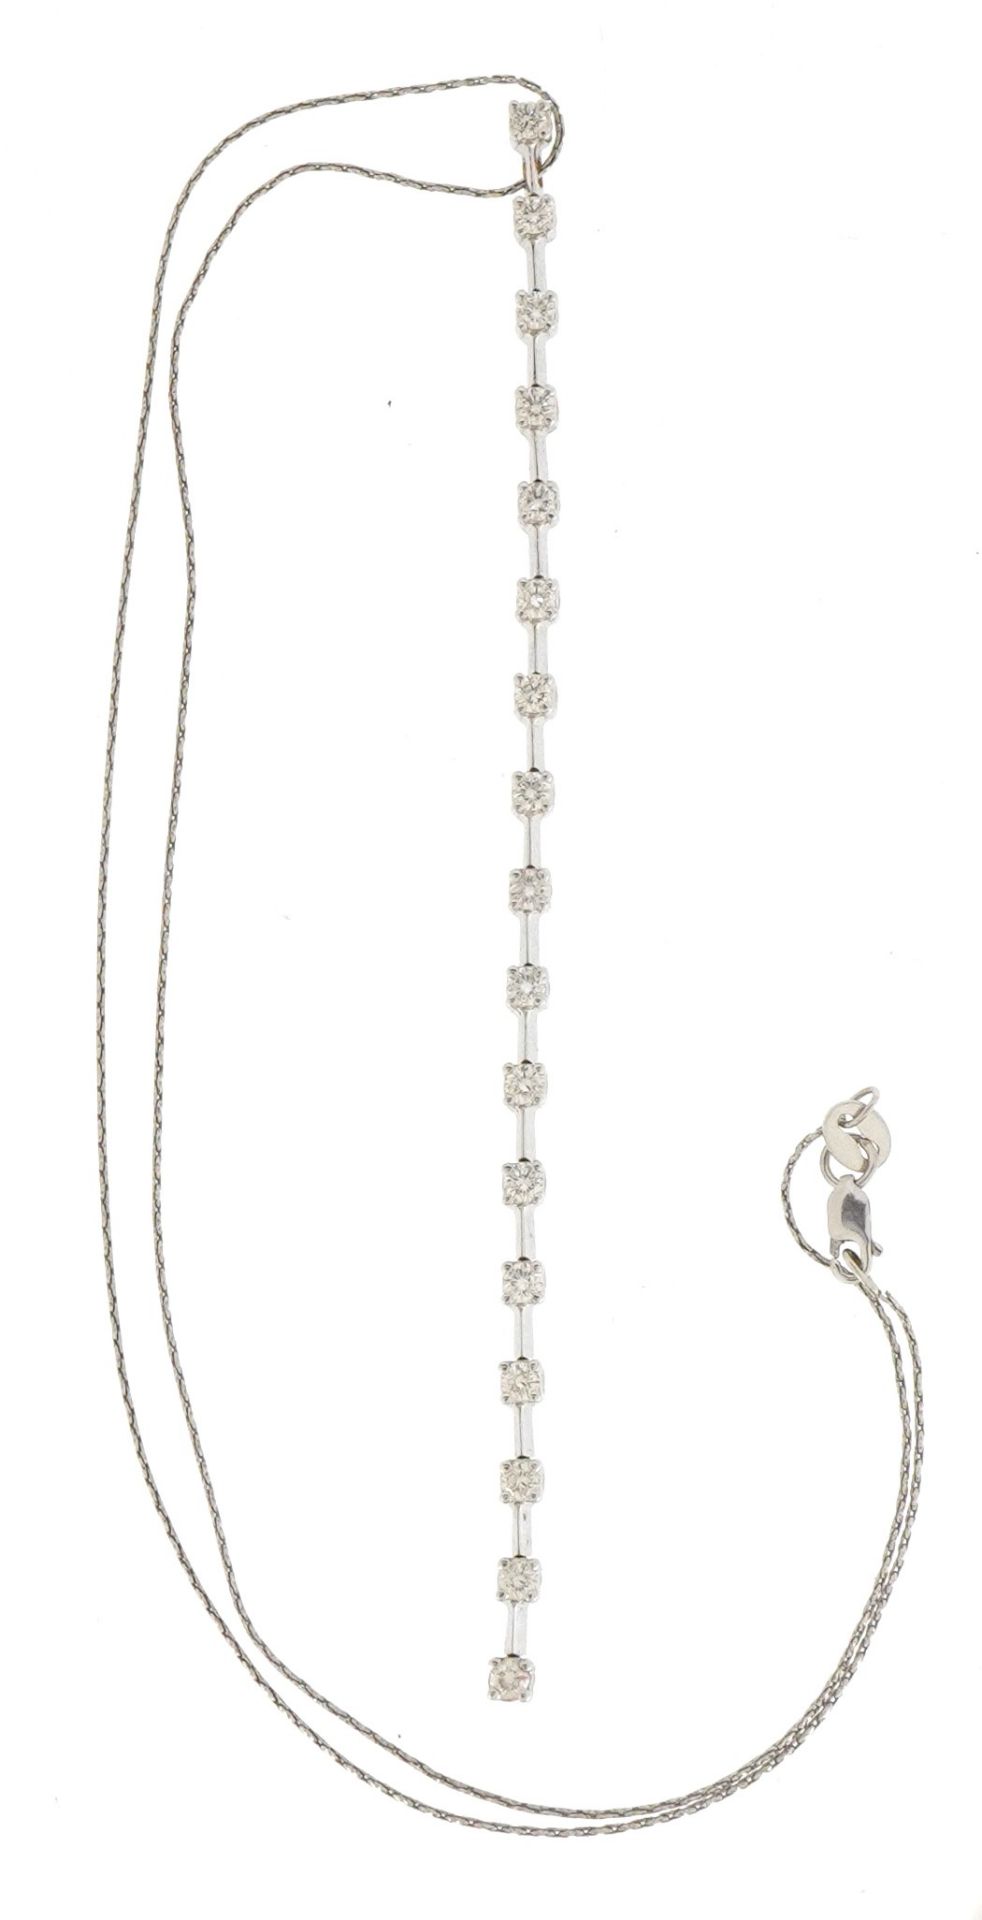 18ct white gold diamond line pendant set with seventeen diamonds on a 18ct white gold necklace, - Image 4 of 8